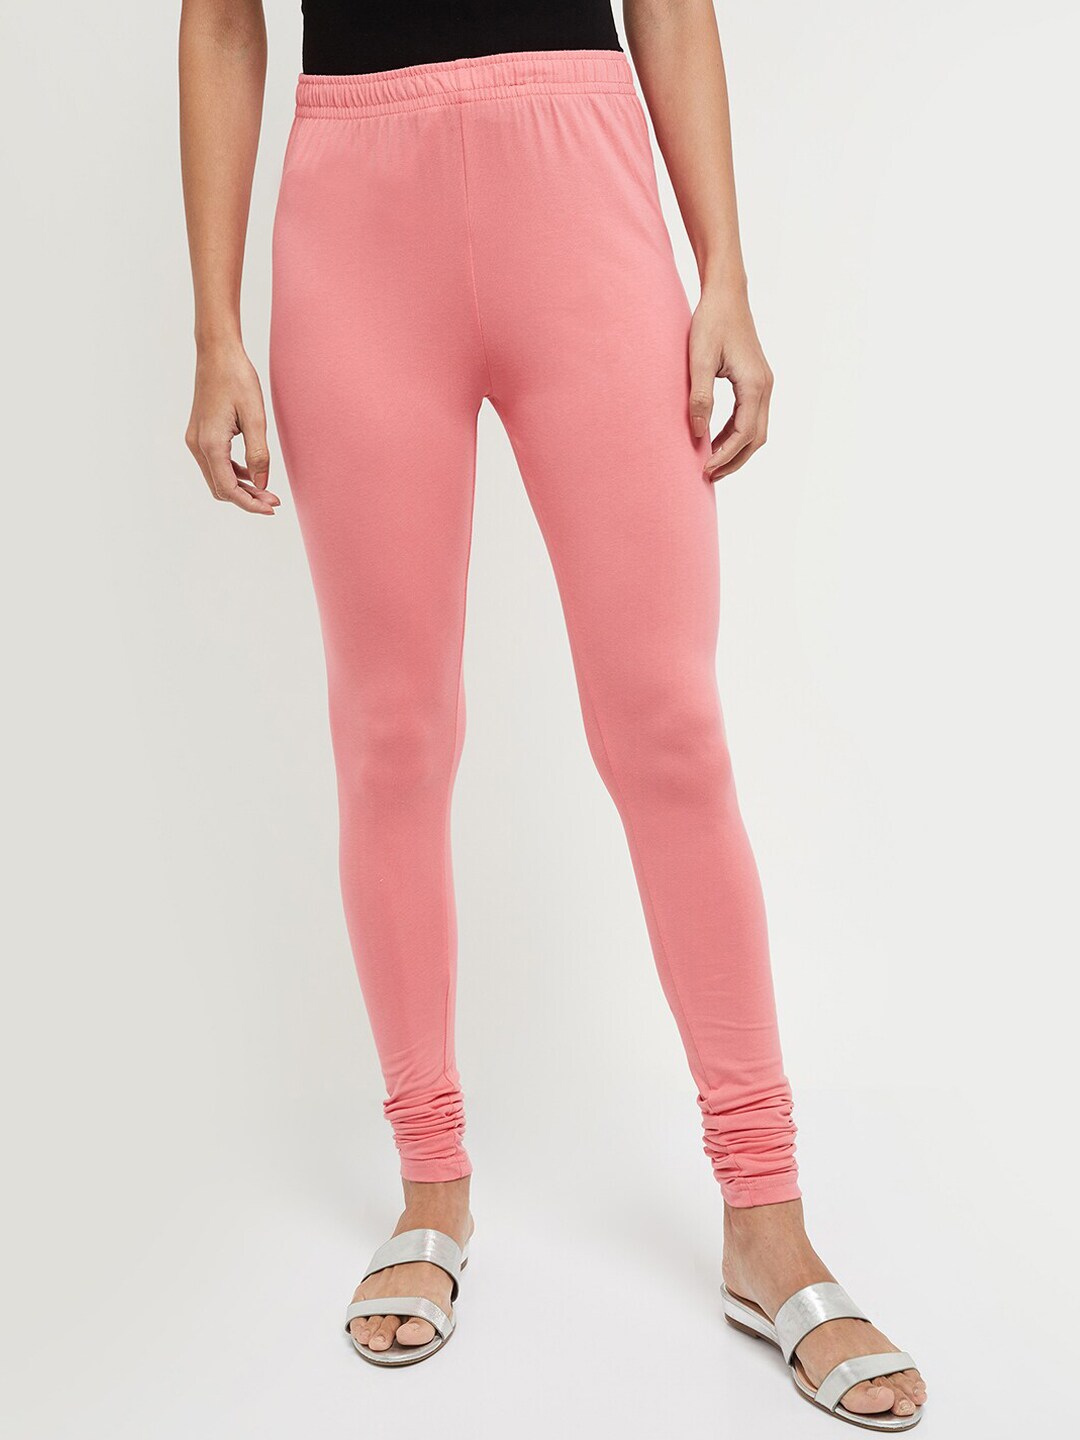 max Women Coral-Coloured Solid Churidar-Length Leggings Price in India